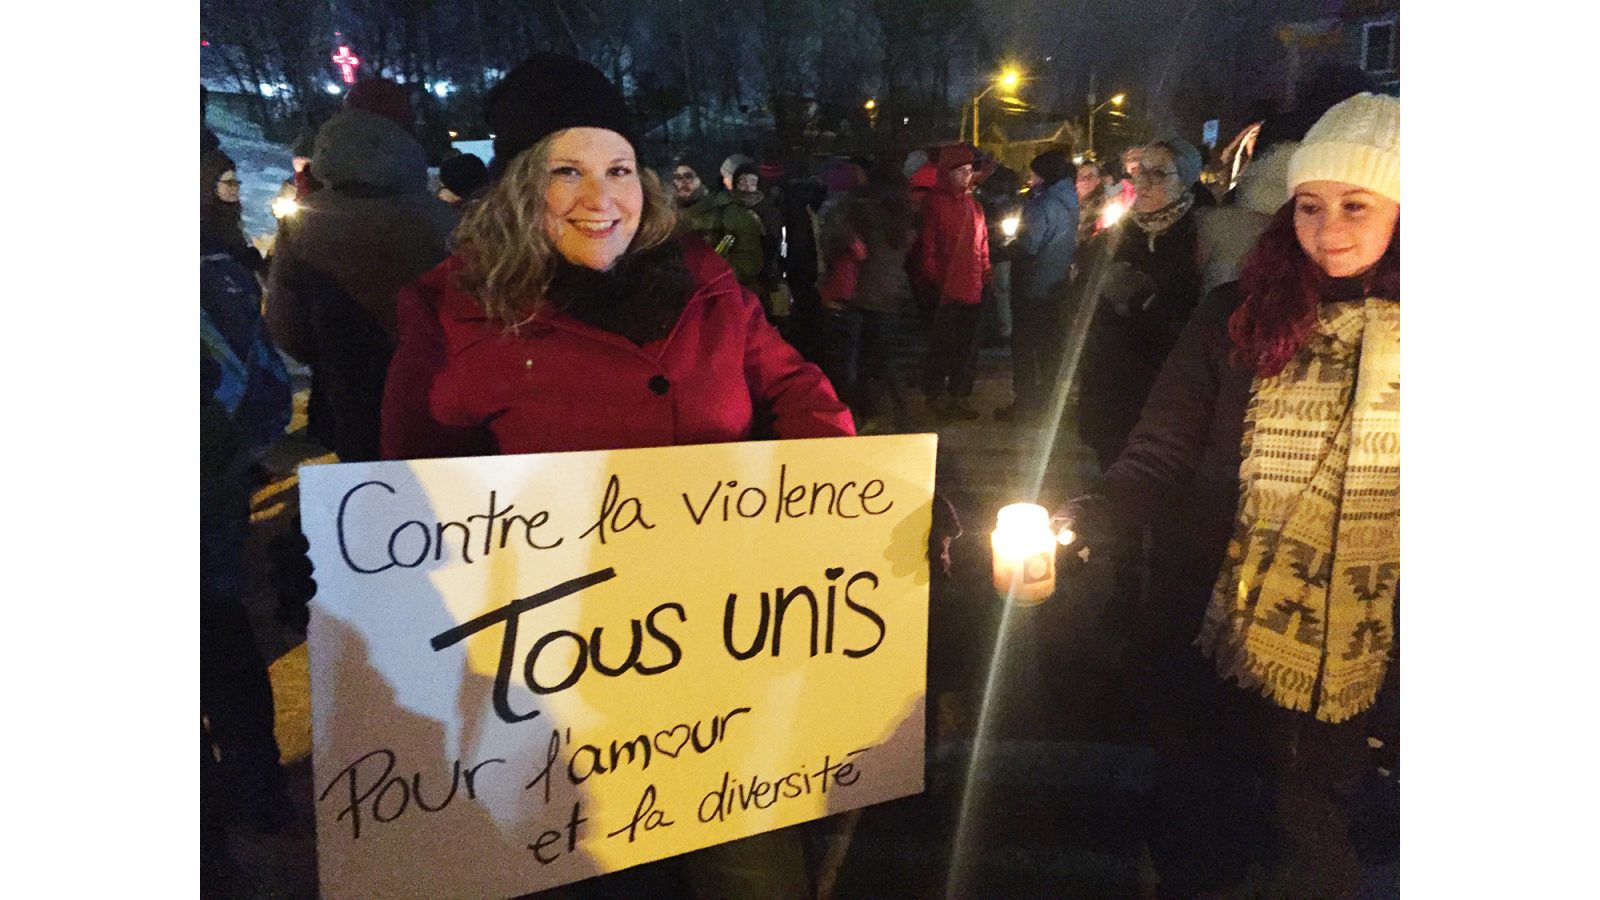 Vigil to be held in memory of those killed in Quebec City mosque shooting